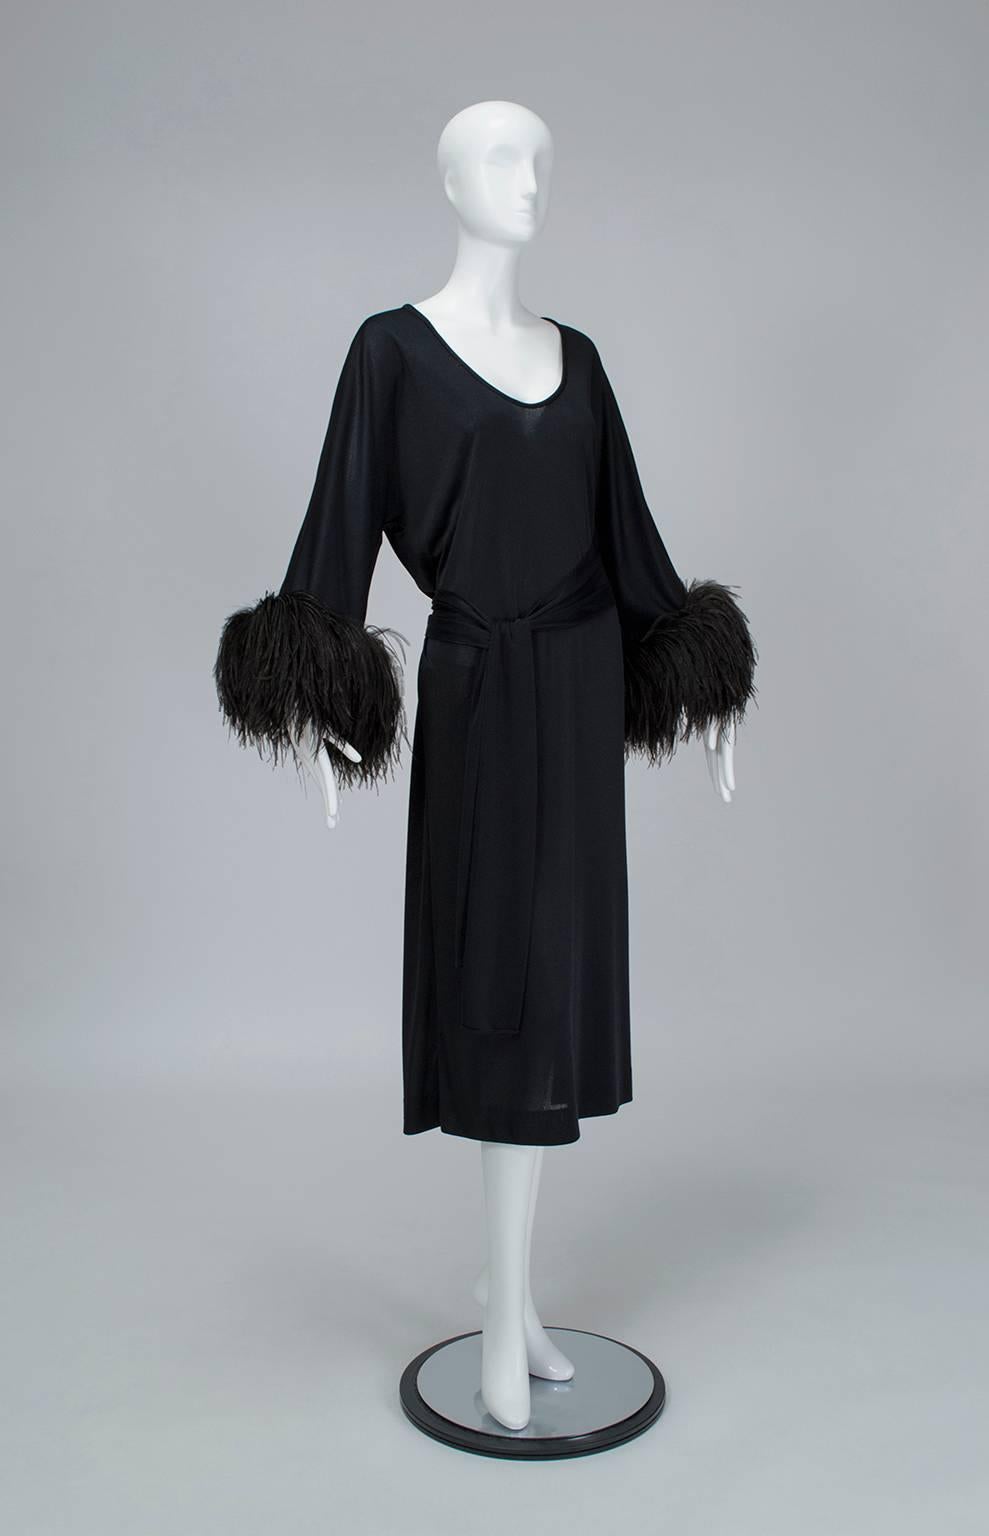 It's hard to beat ostrich feathers for evening drama, and this dress uses just the right quantity to leave an impression. Better still, forgiving jersey fabric provides pajama-like comfort while easy styling flatters a range of sizes.

Vintage